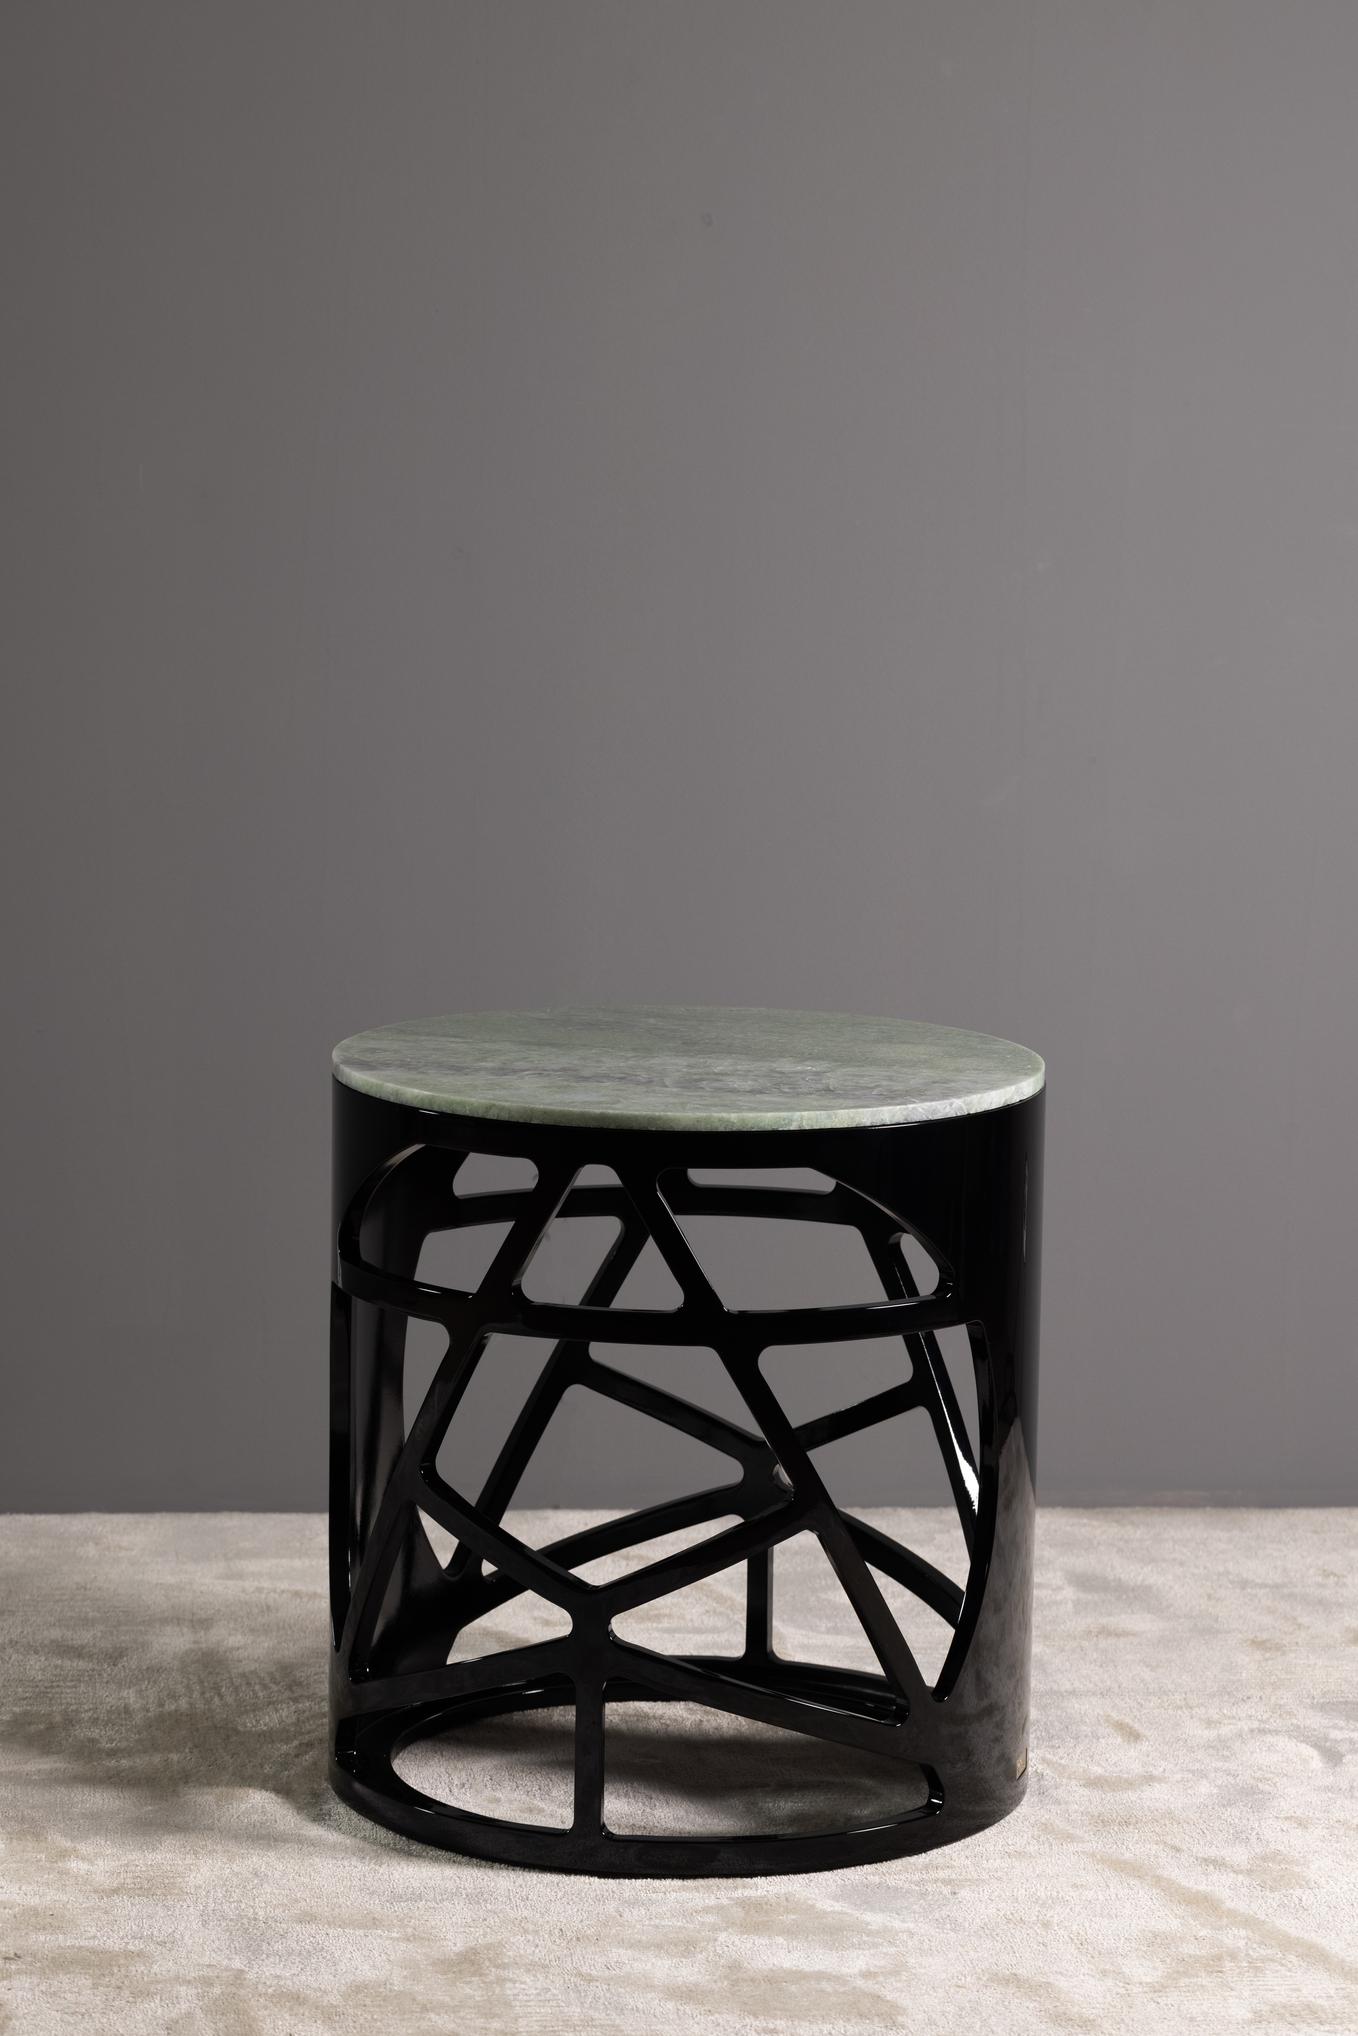 Art Deco Pyrite Side Table, Calacatta Marble, Handmade in Portugal by Greenapple For Sale 3